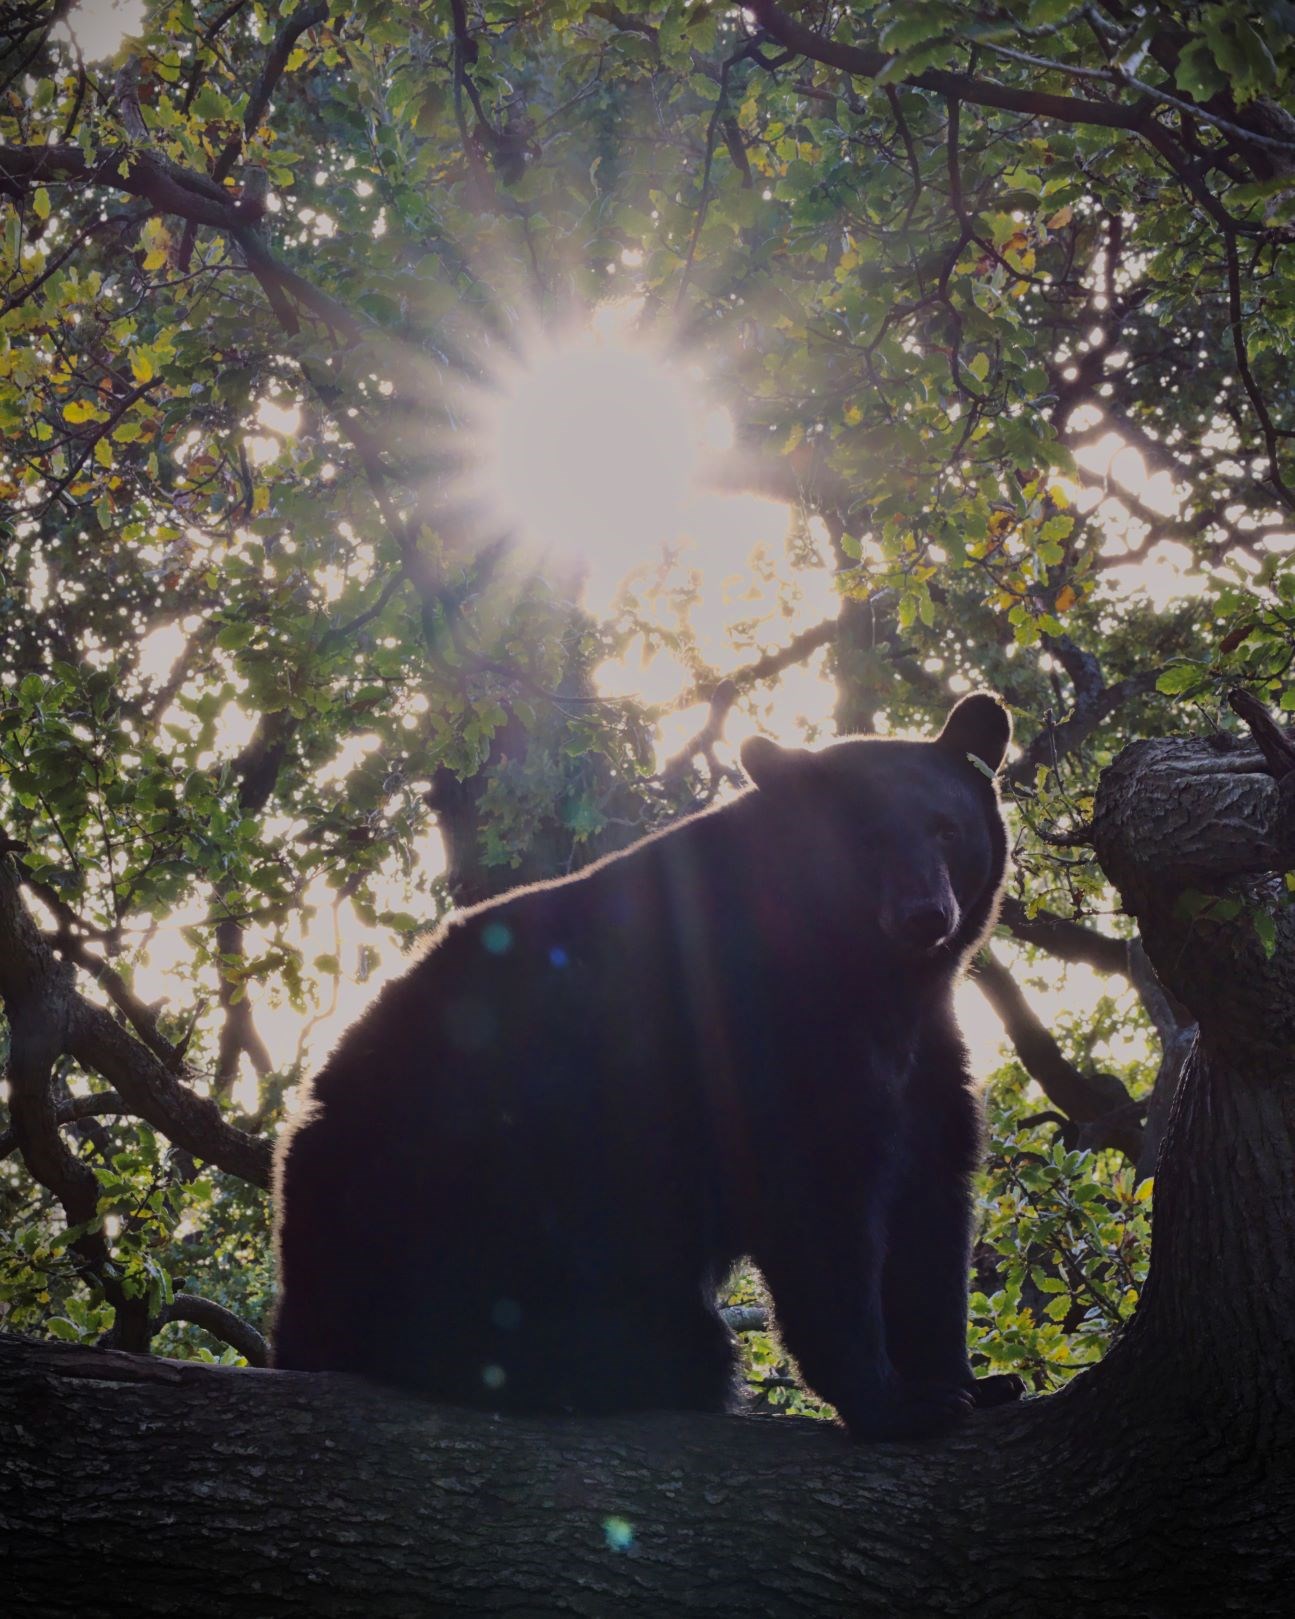 North American Black Bear silhouette illuminated by the sun through the trees behind 